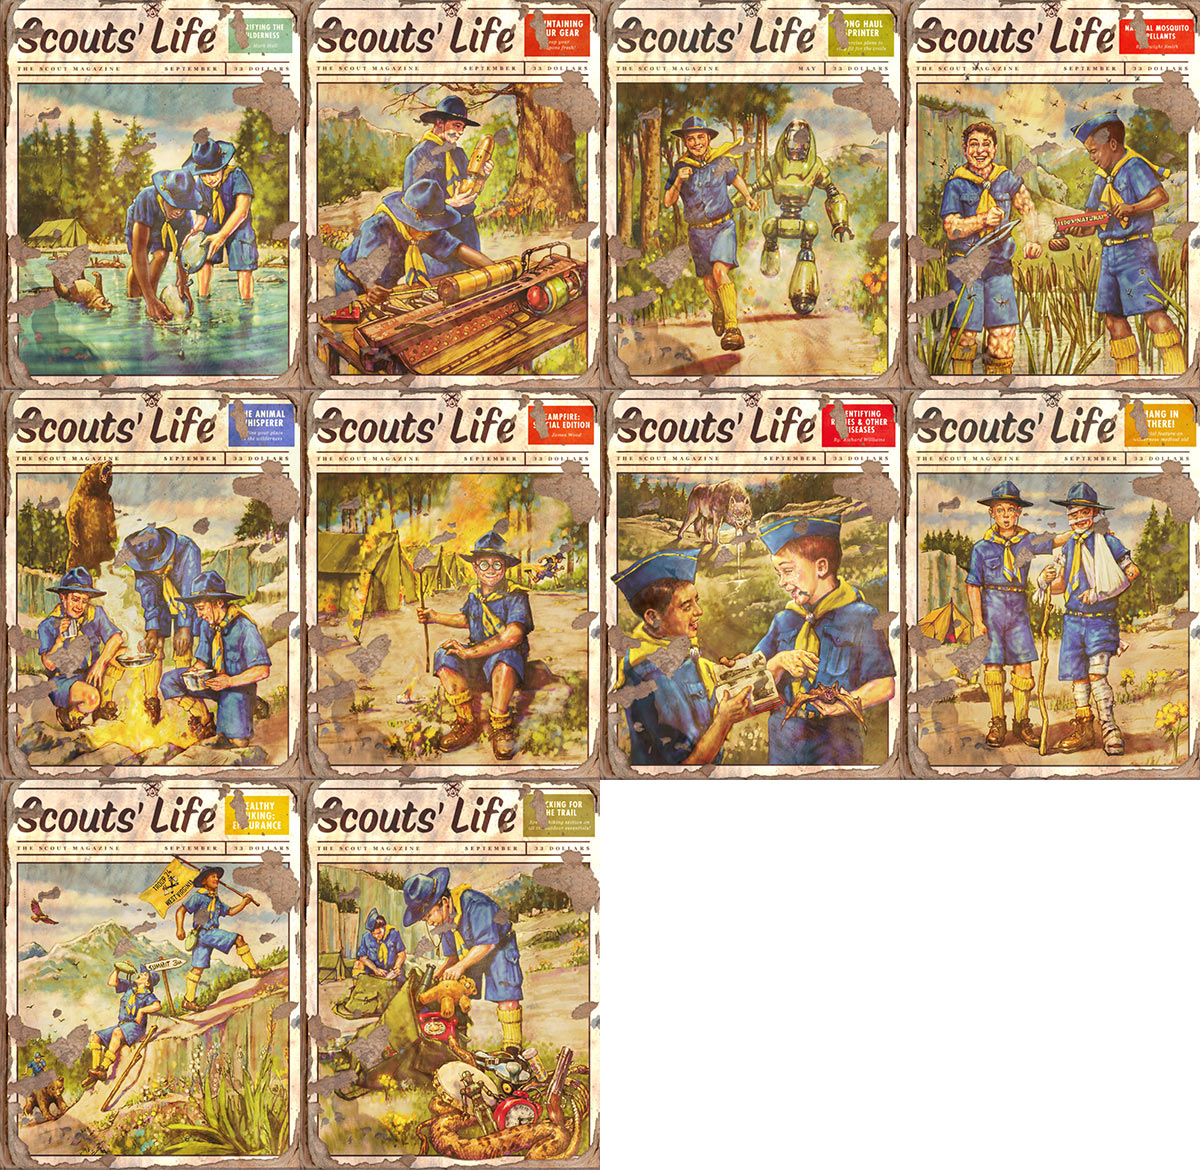 Fallout 76 - Scouts Life Magazines in Fallout 76